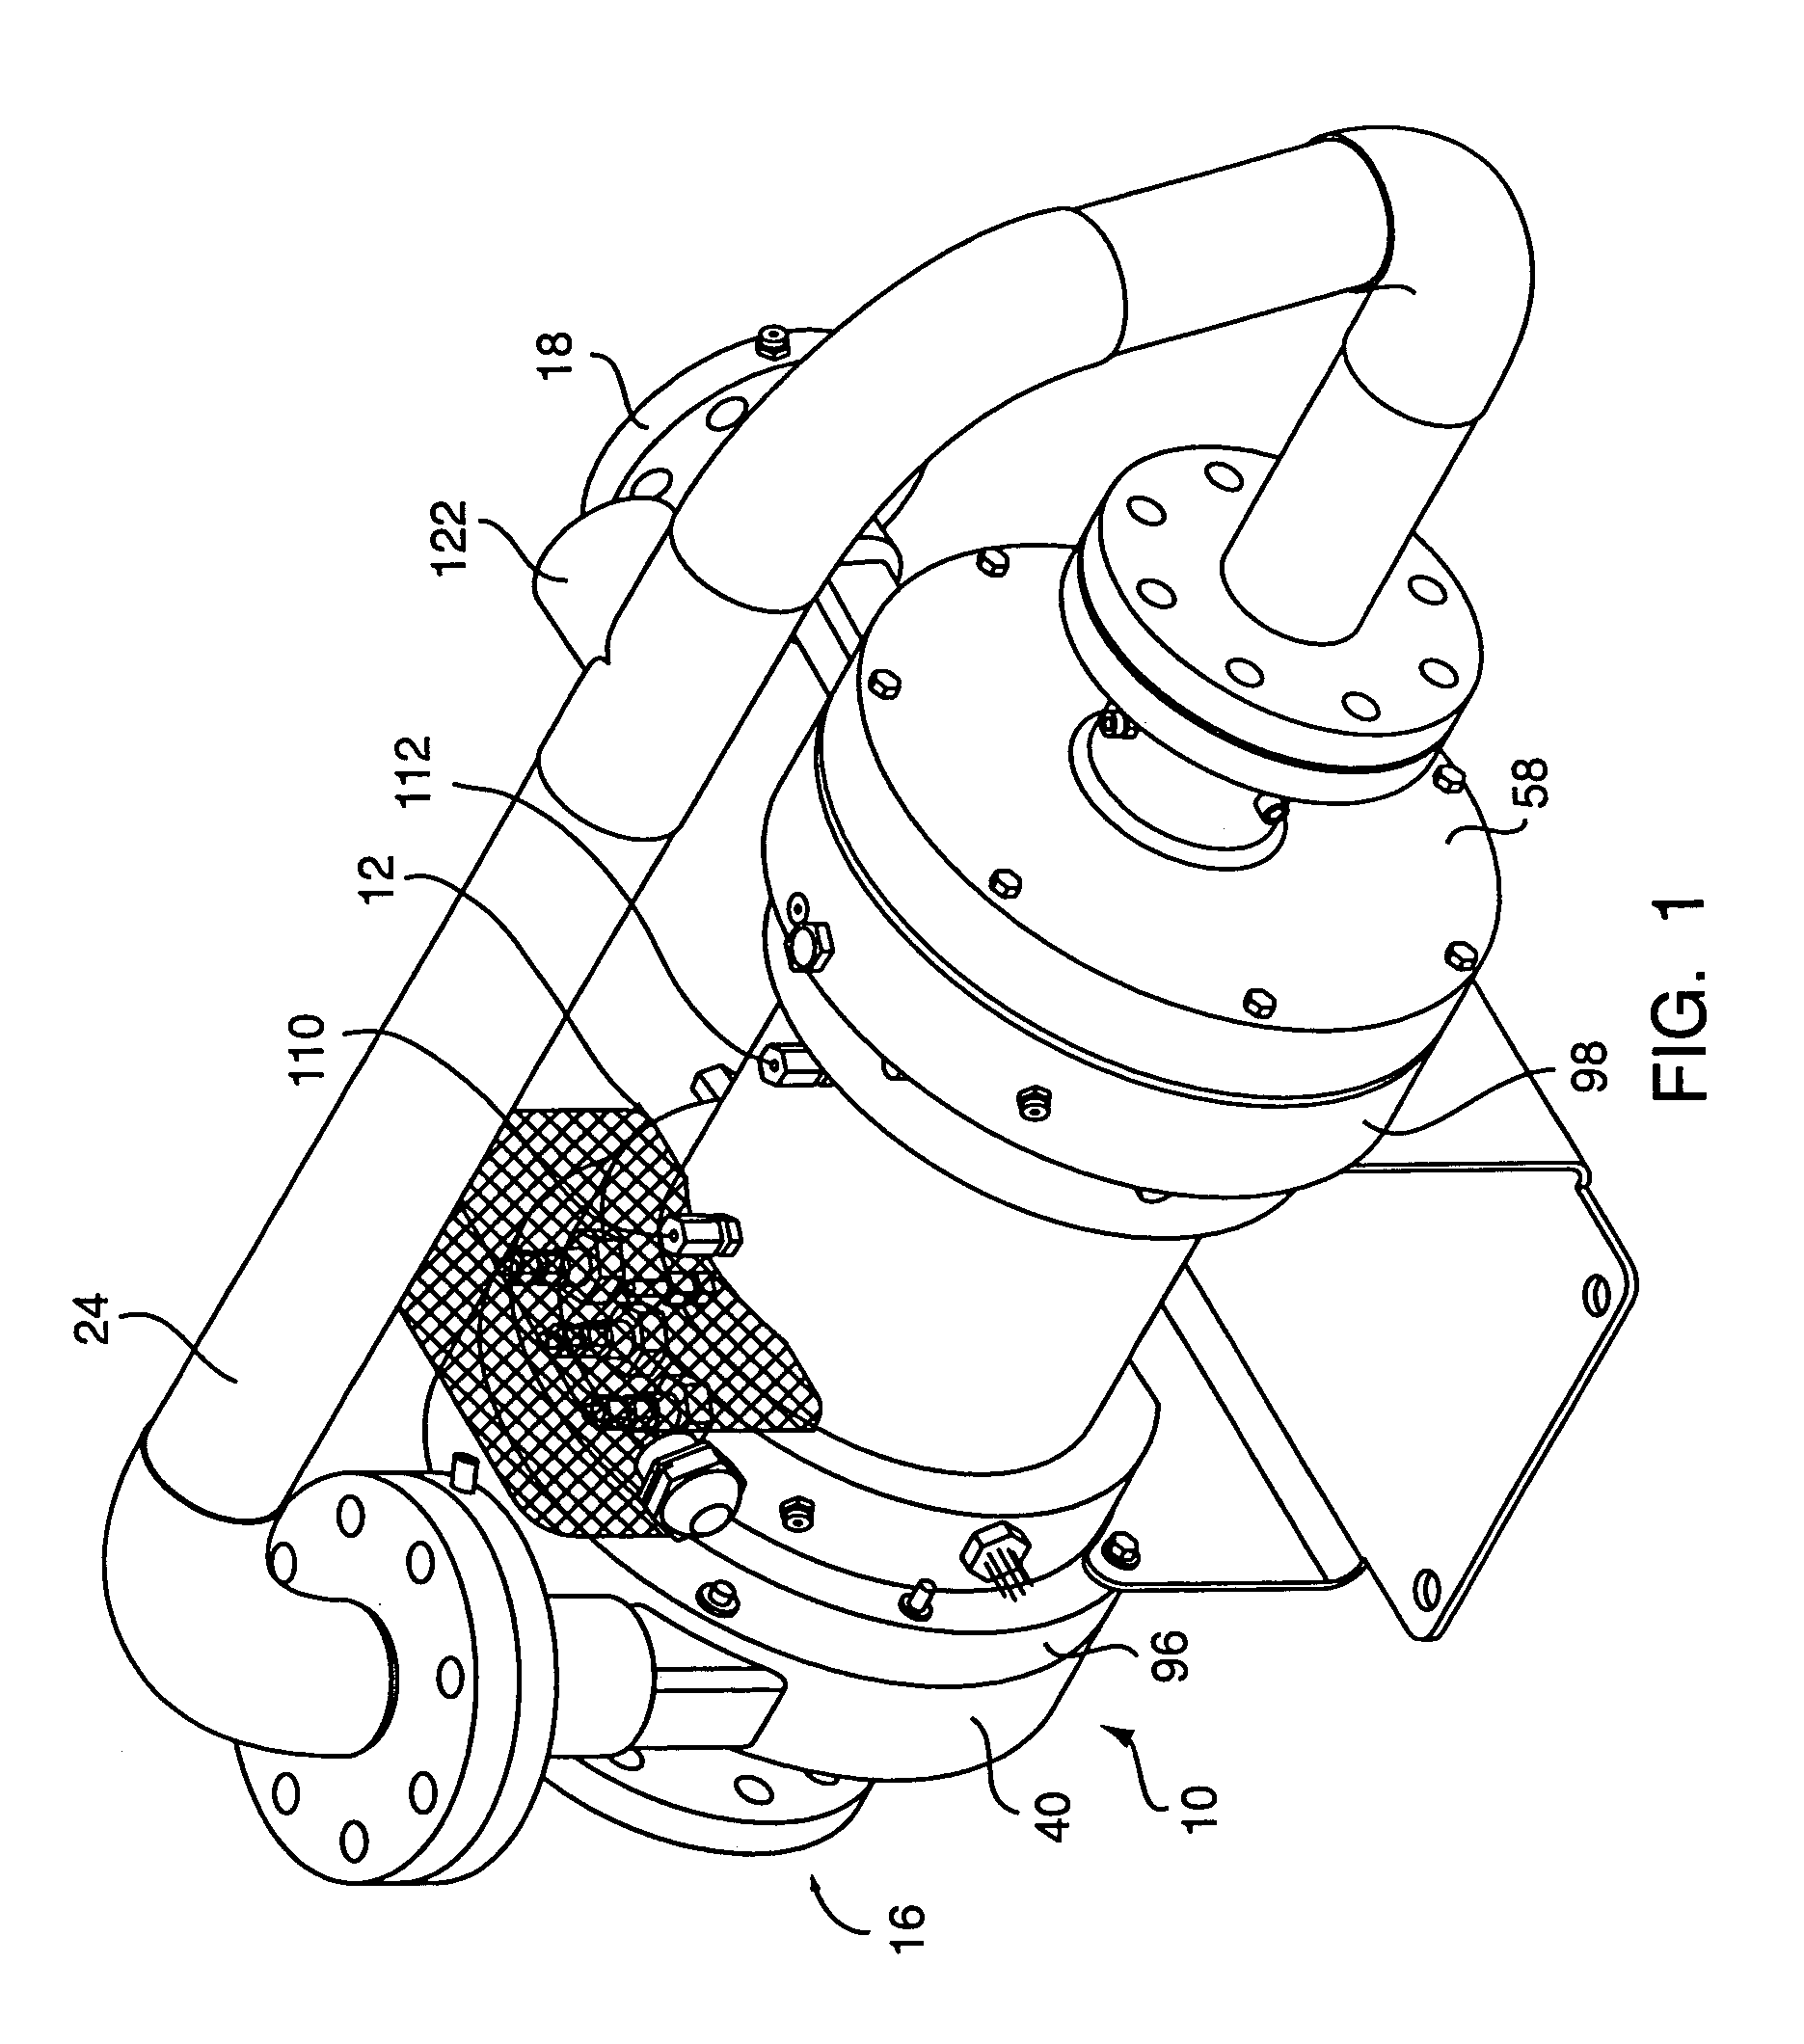 Motor driven two-stage centrifugal air-conditioning compressor